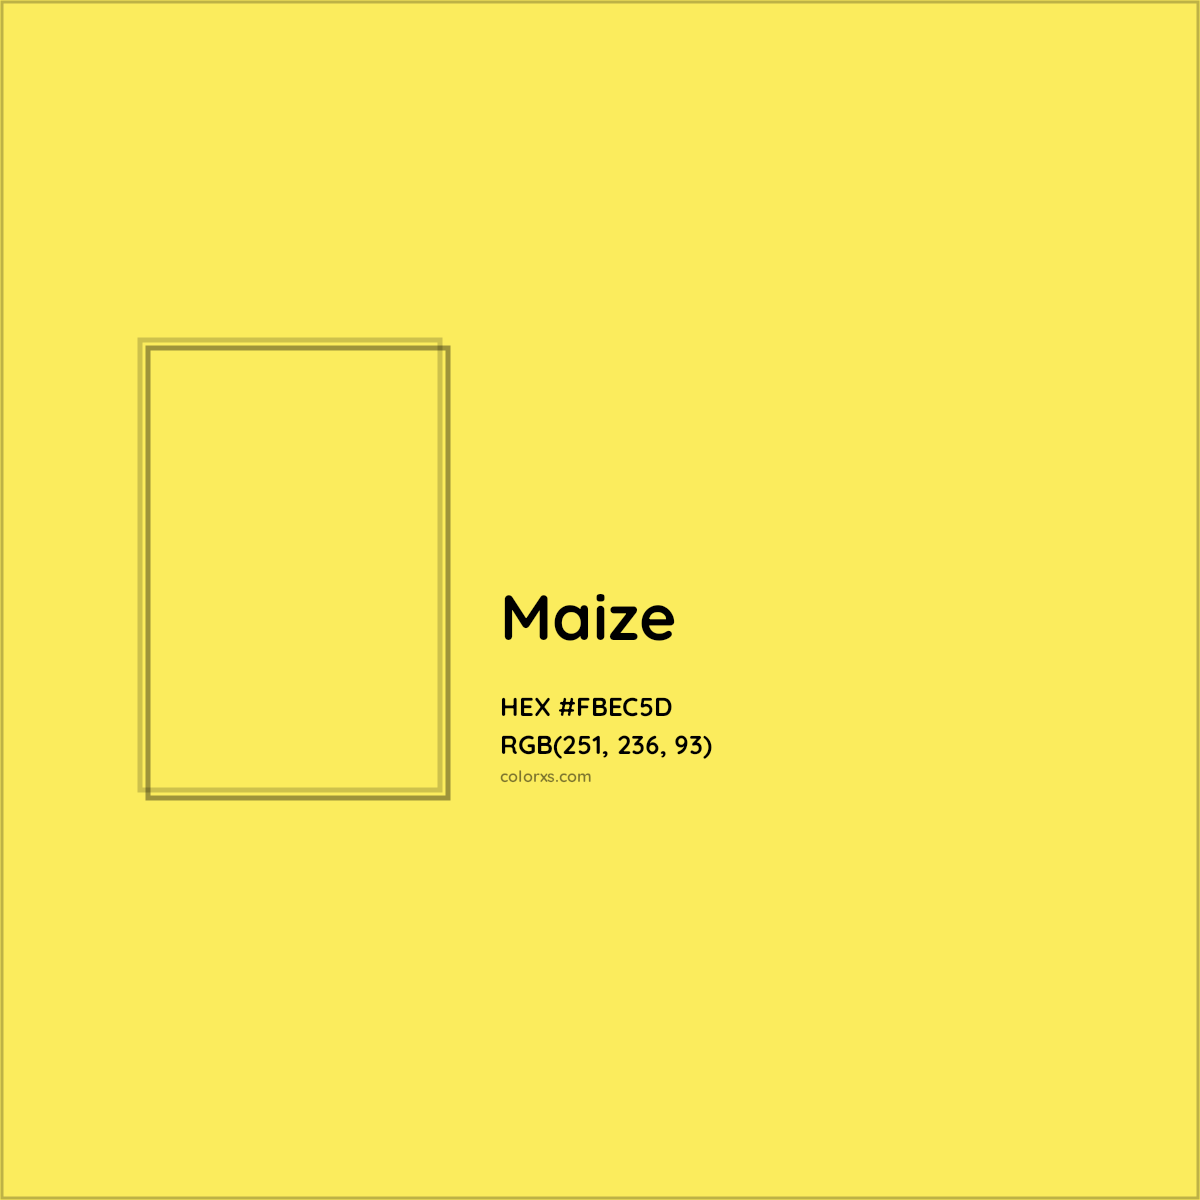 HEX #FBEC5D Maize Other - Color Code